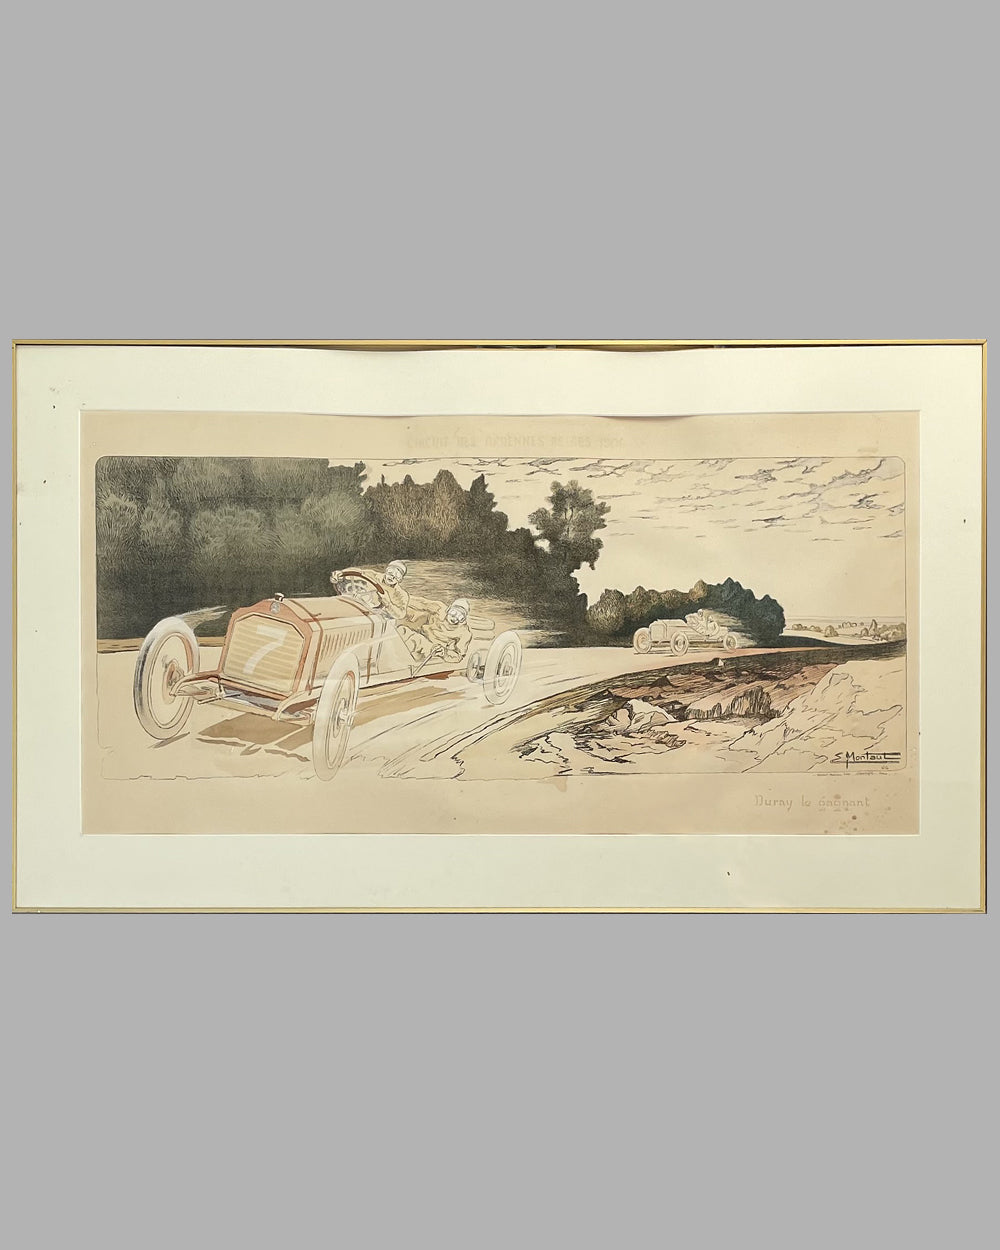 Duray le gagnant, hand colored lithograph, 1906 by Ernest Montaut